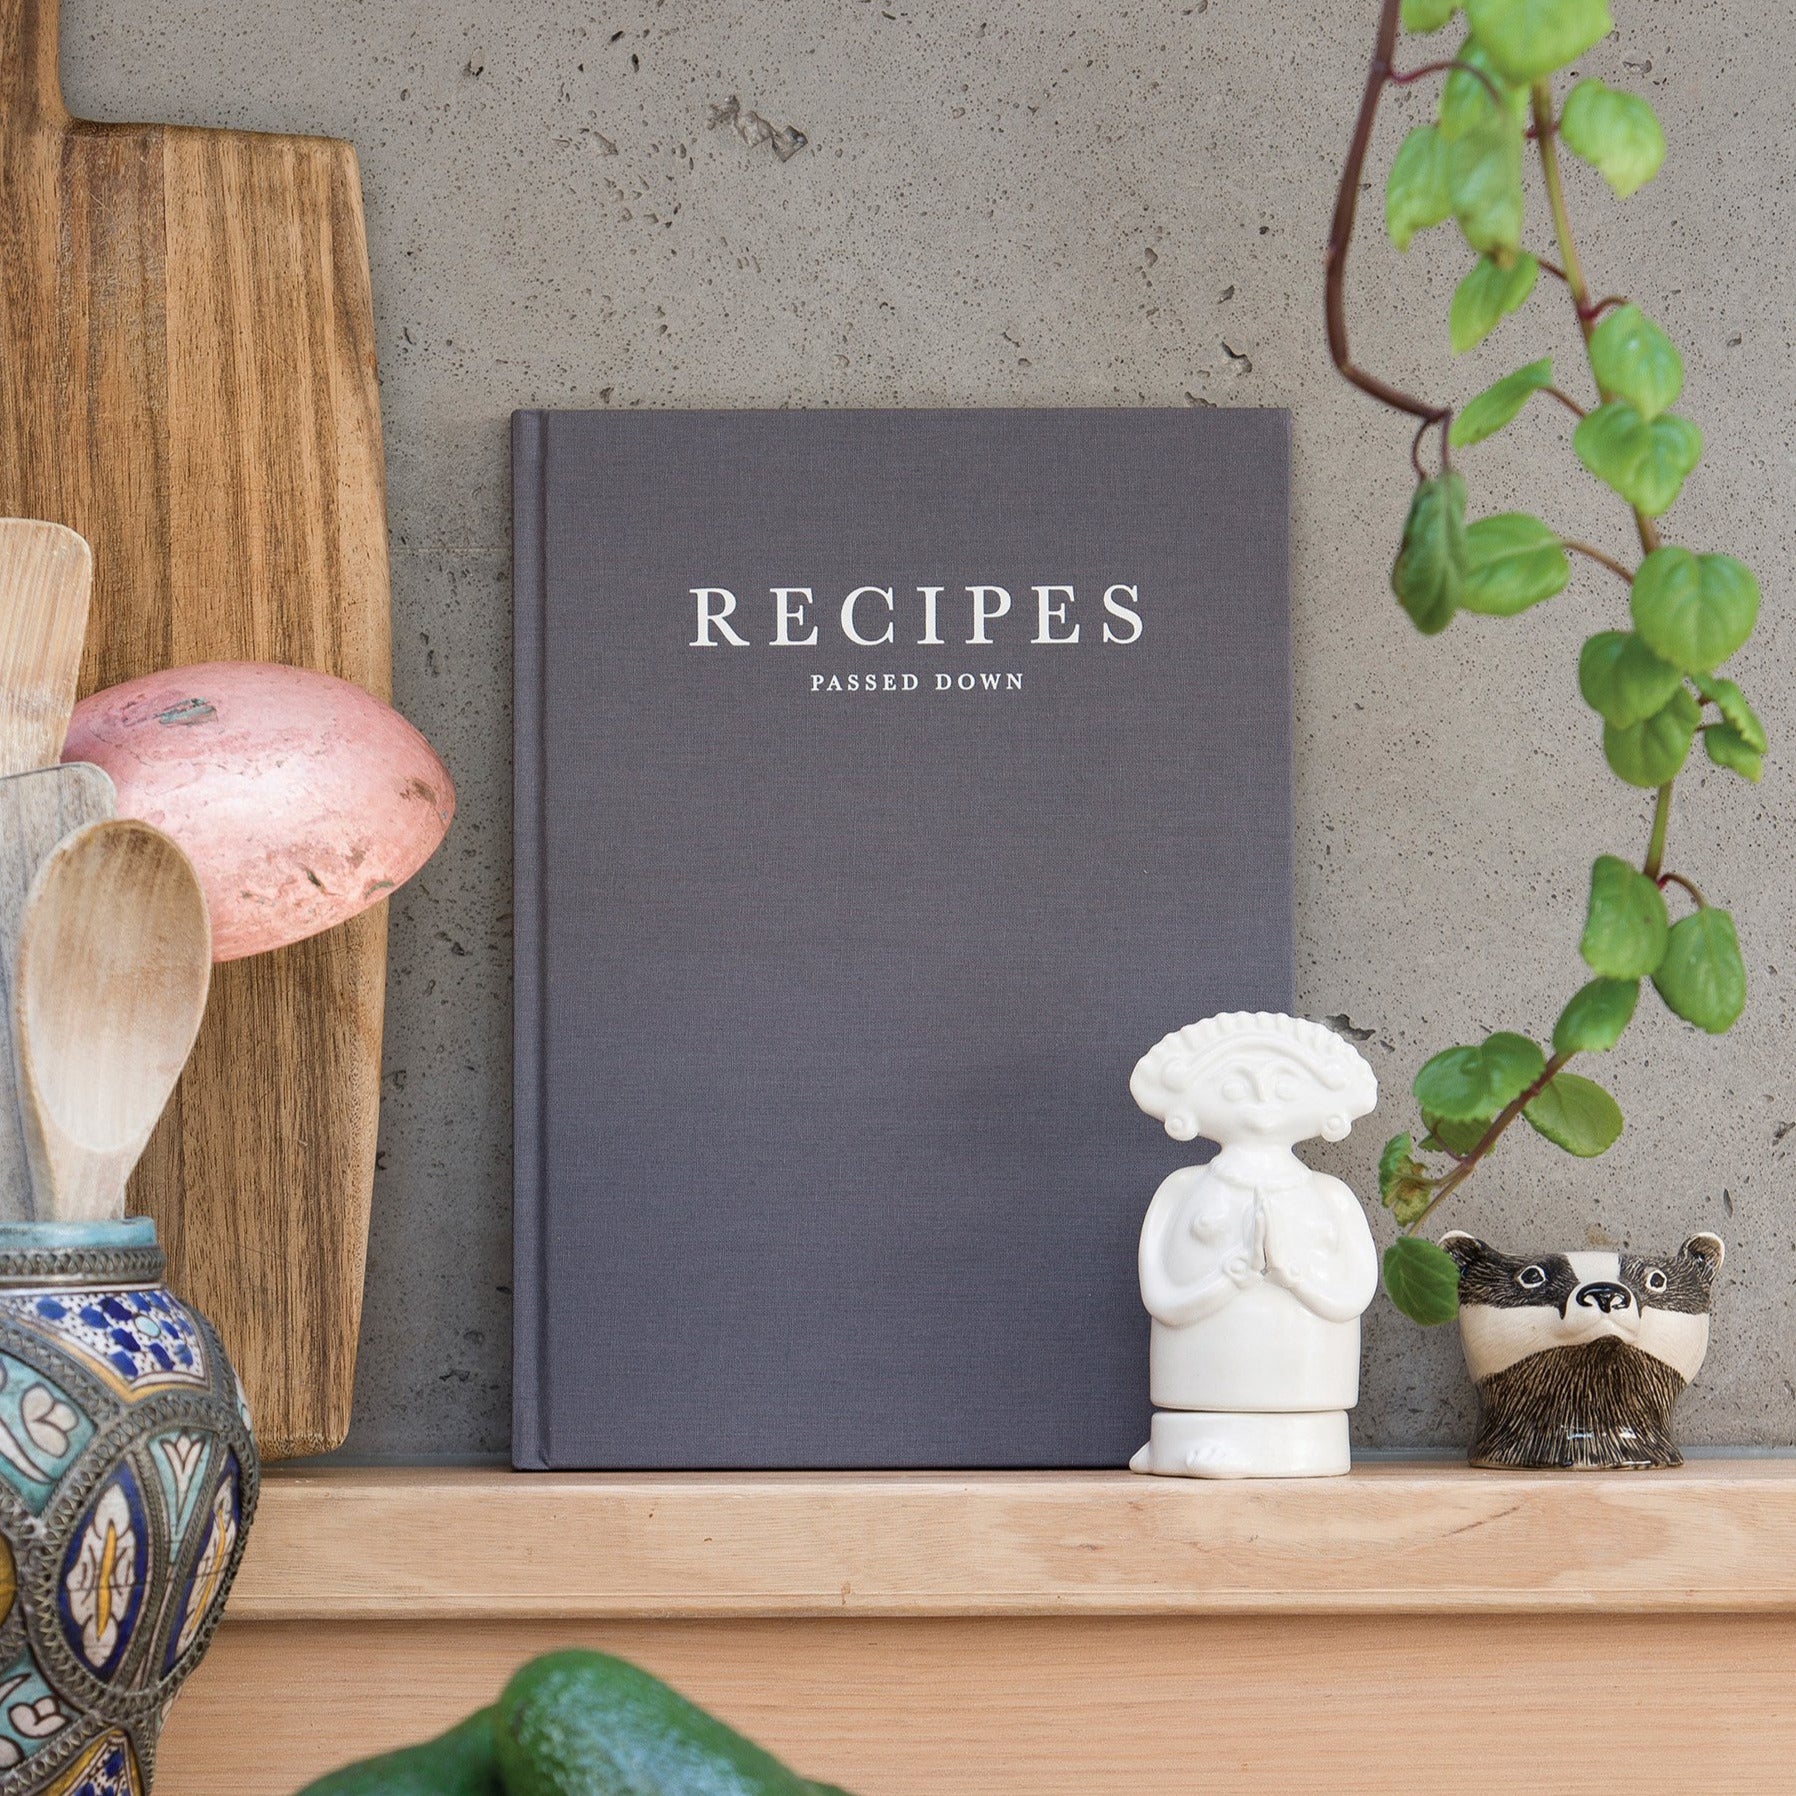 Write to Me | Recipes, Passed Down - Journal